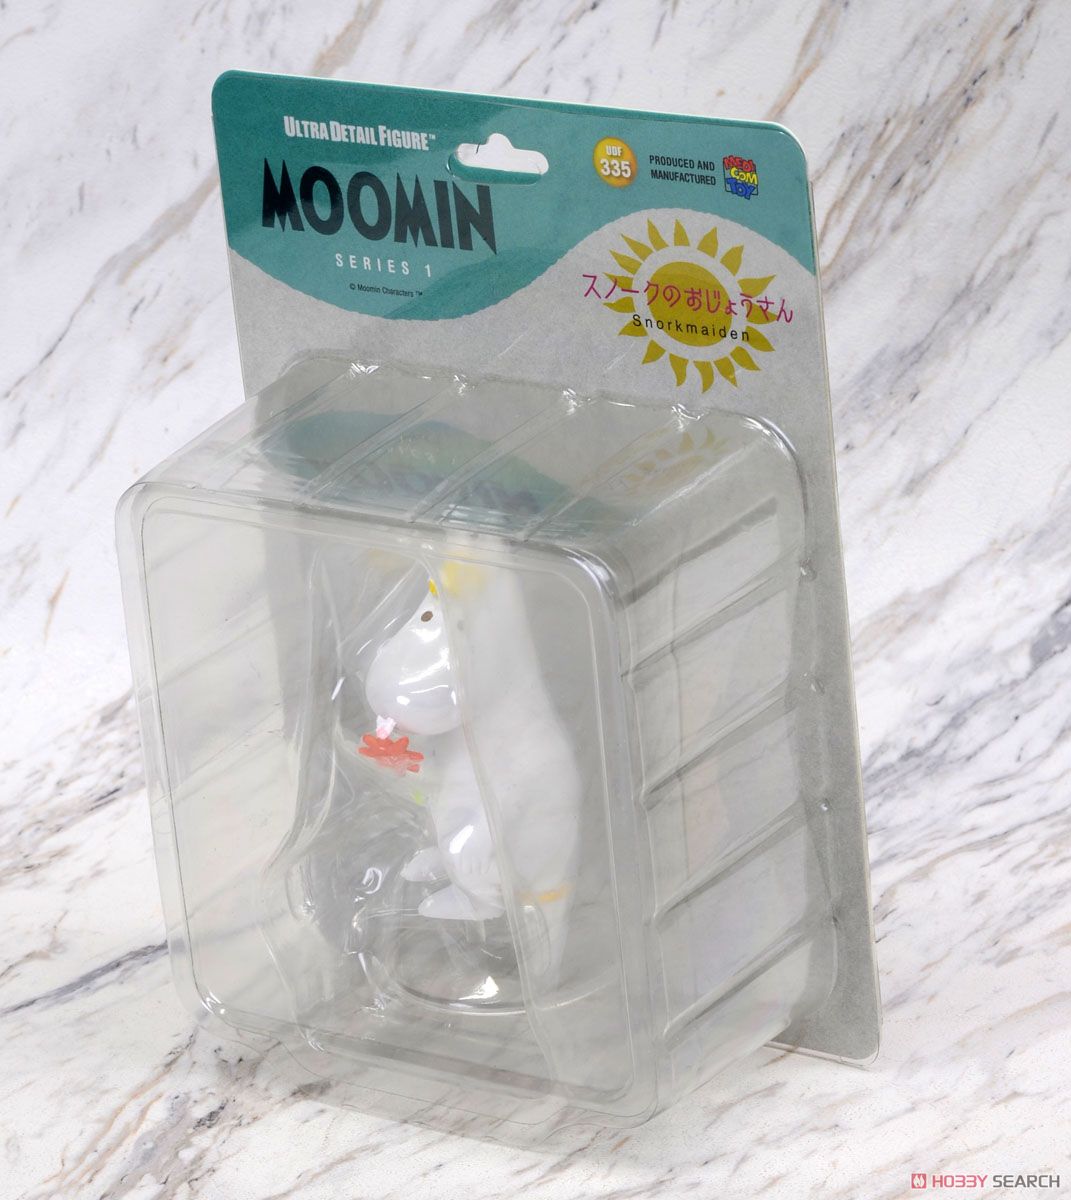 UDF No.335 [Moomin] Series 1 Snorkmaiden (Completed) Package1